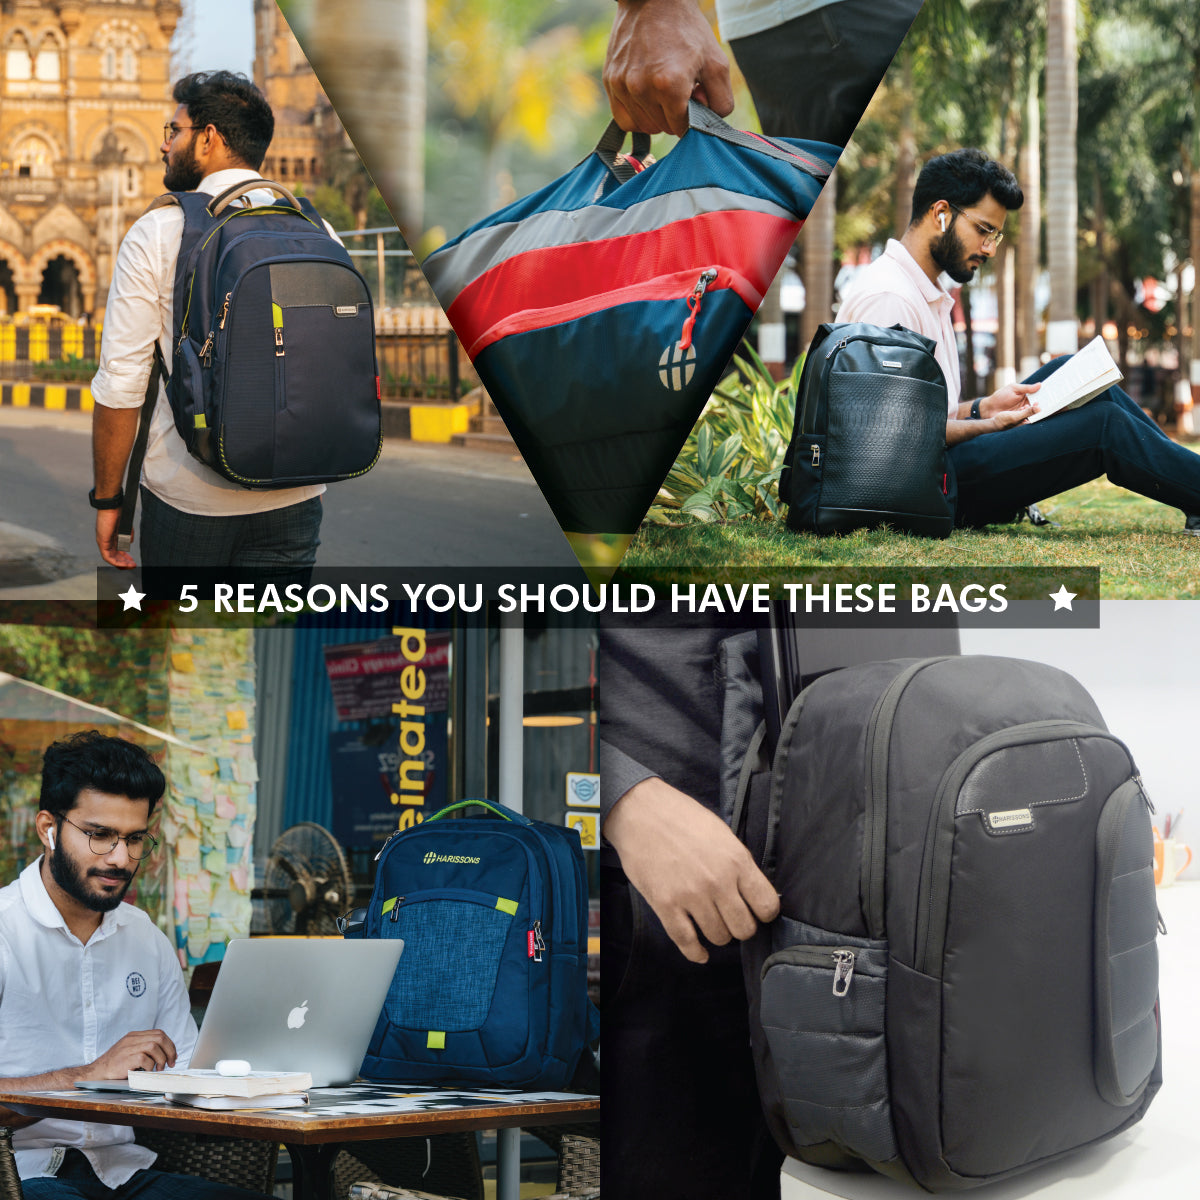 5 Reasons You Should Have These Bags